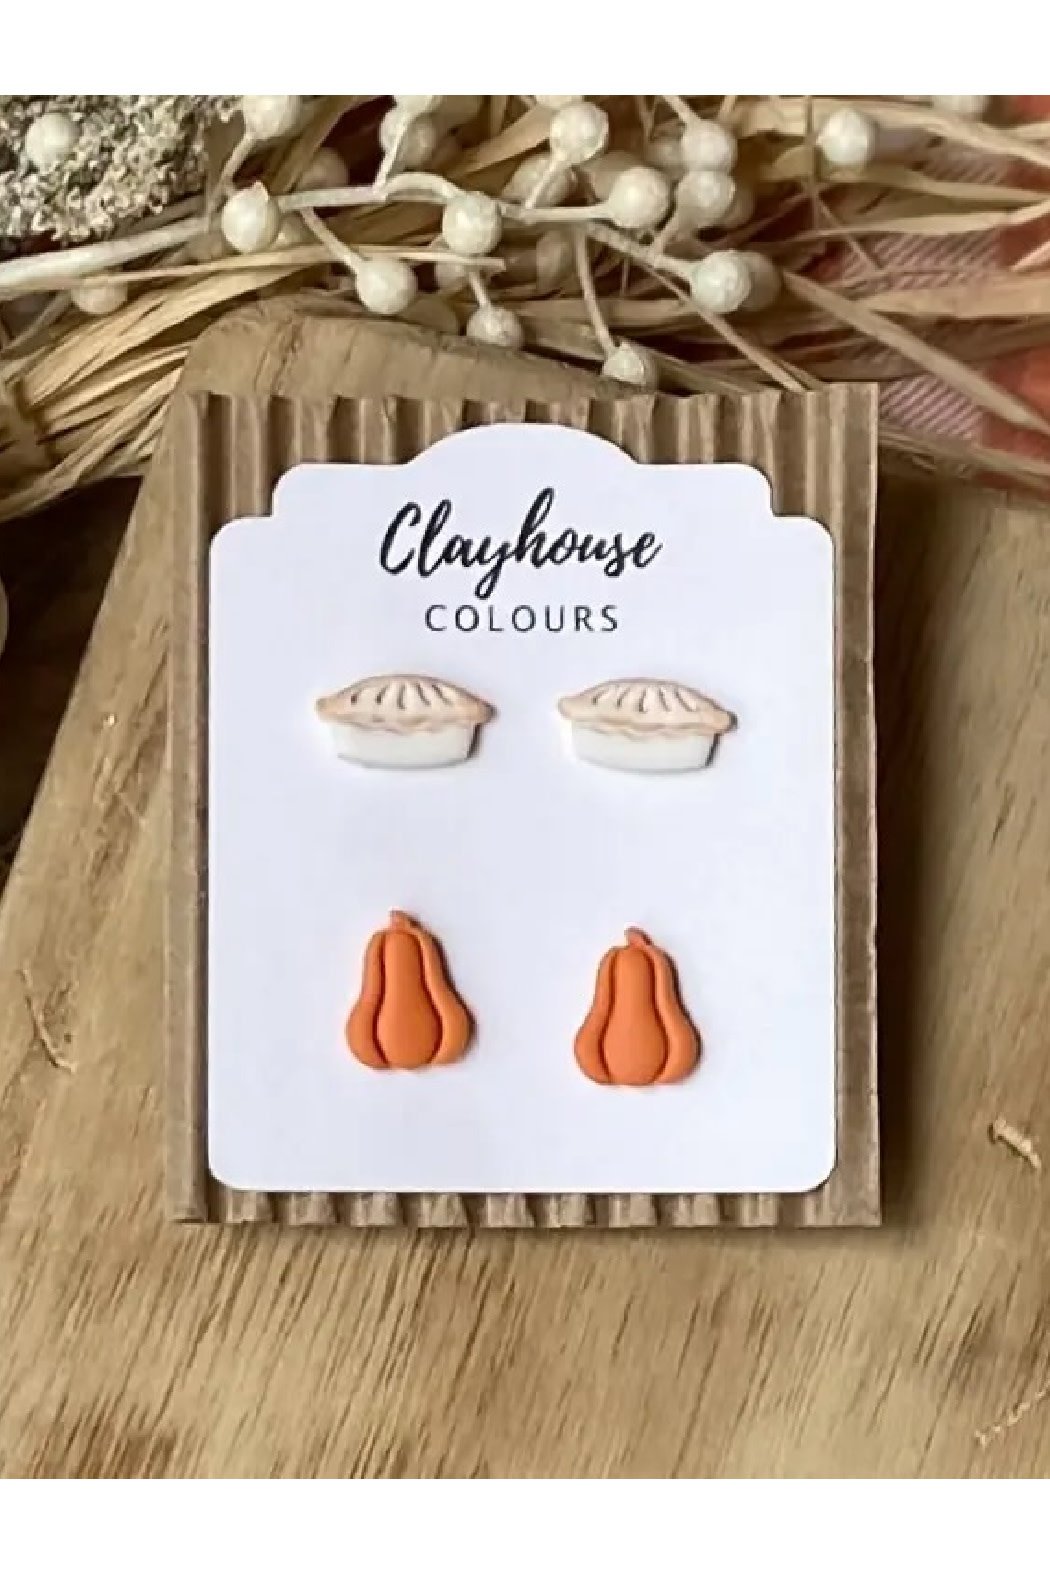 Clayhouse Colours Thanksgiving stud earrings